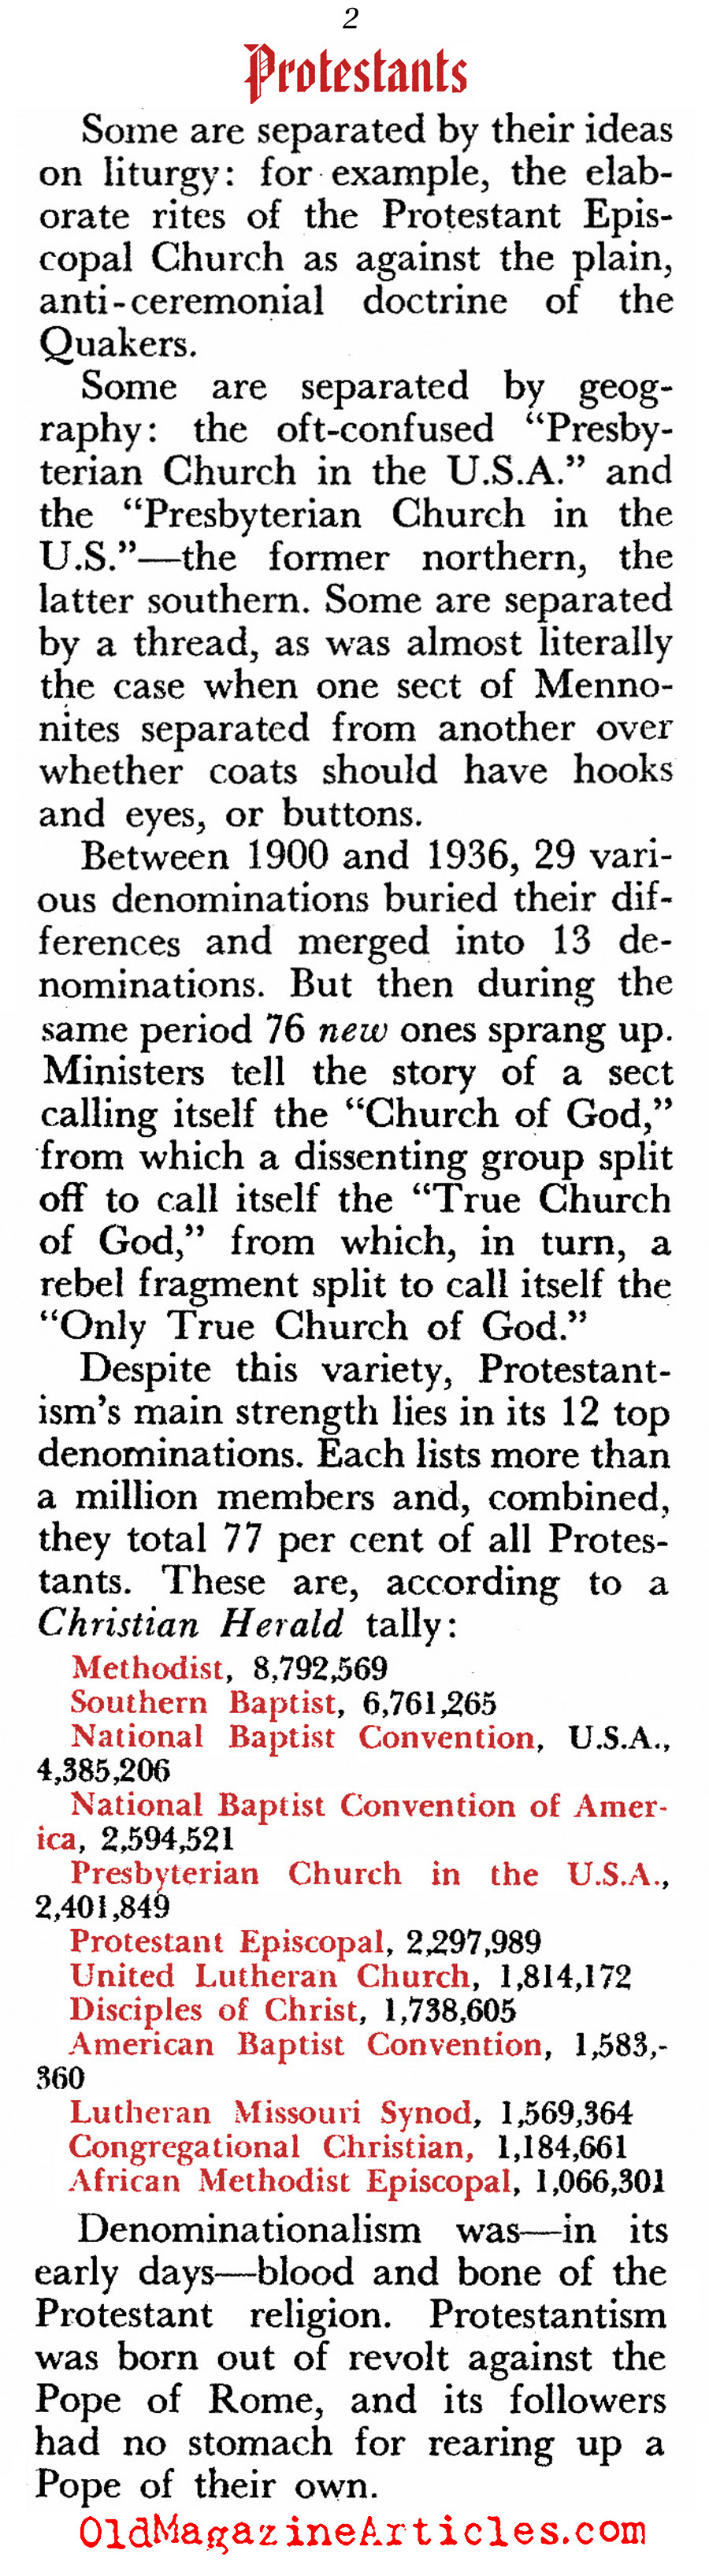 Protestants in America (Pageant Magazine, 1952)